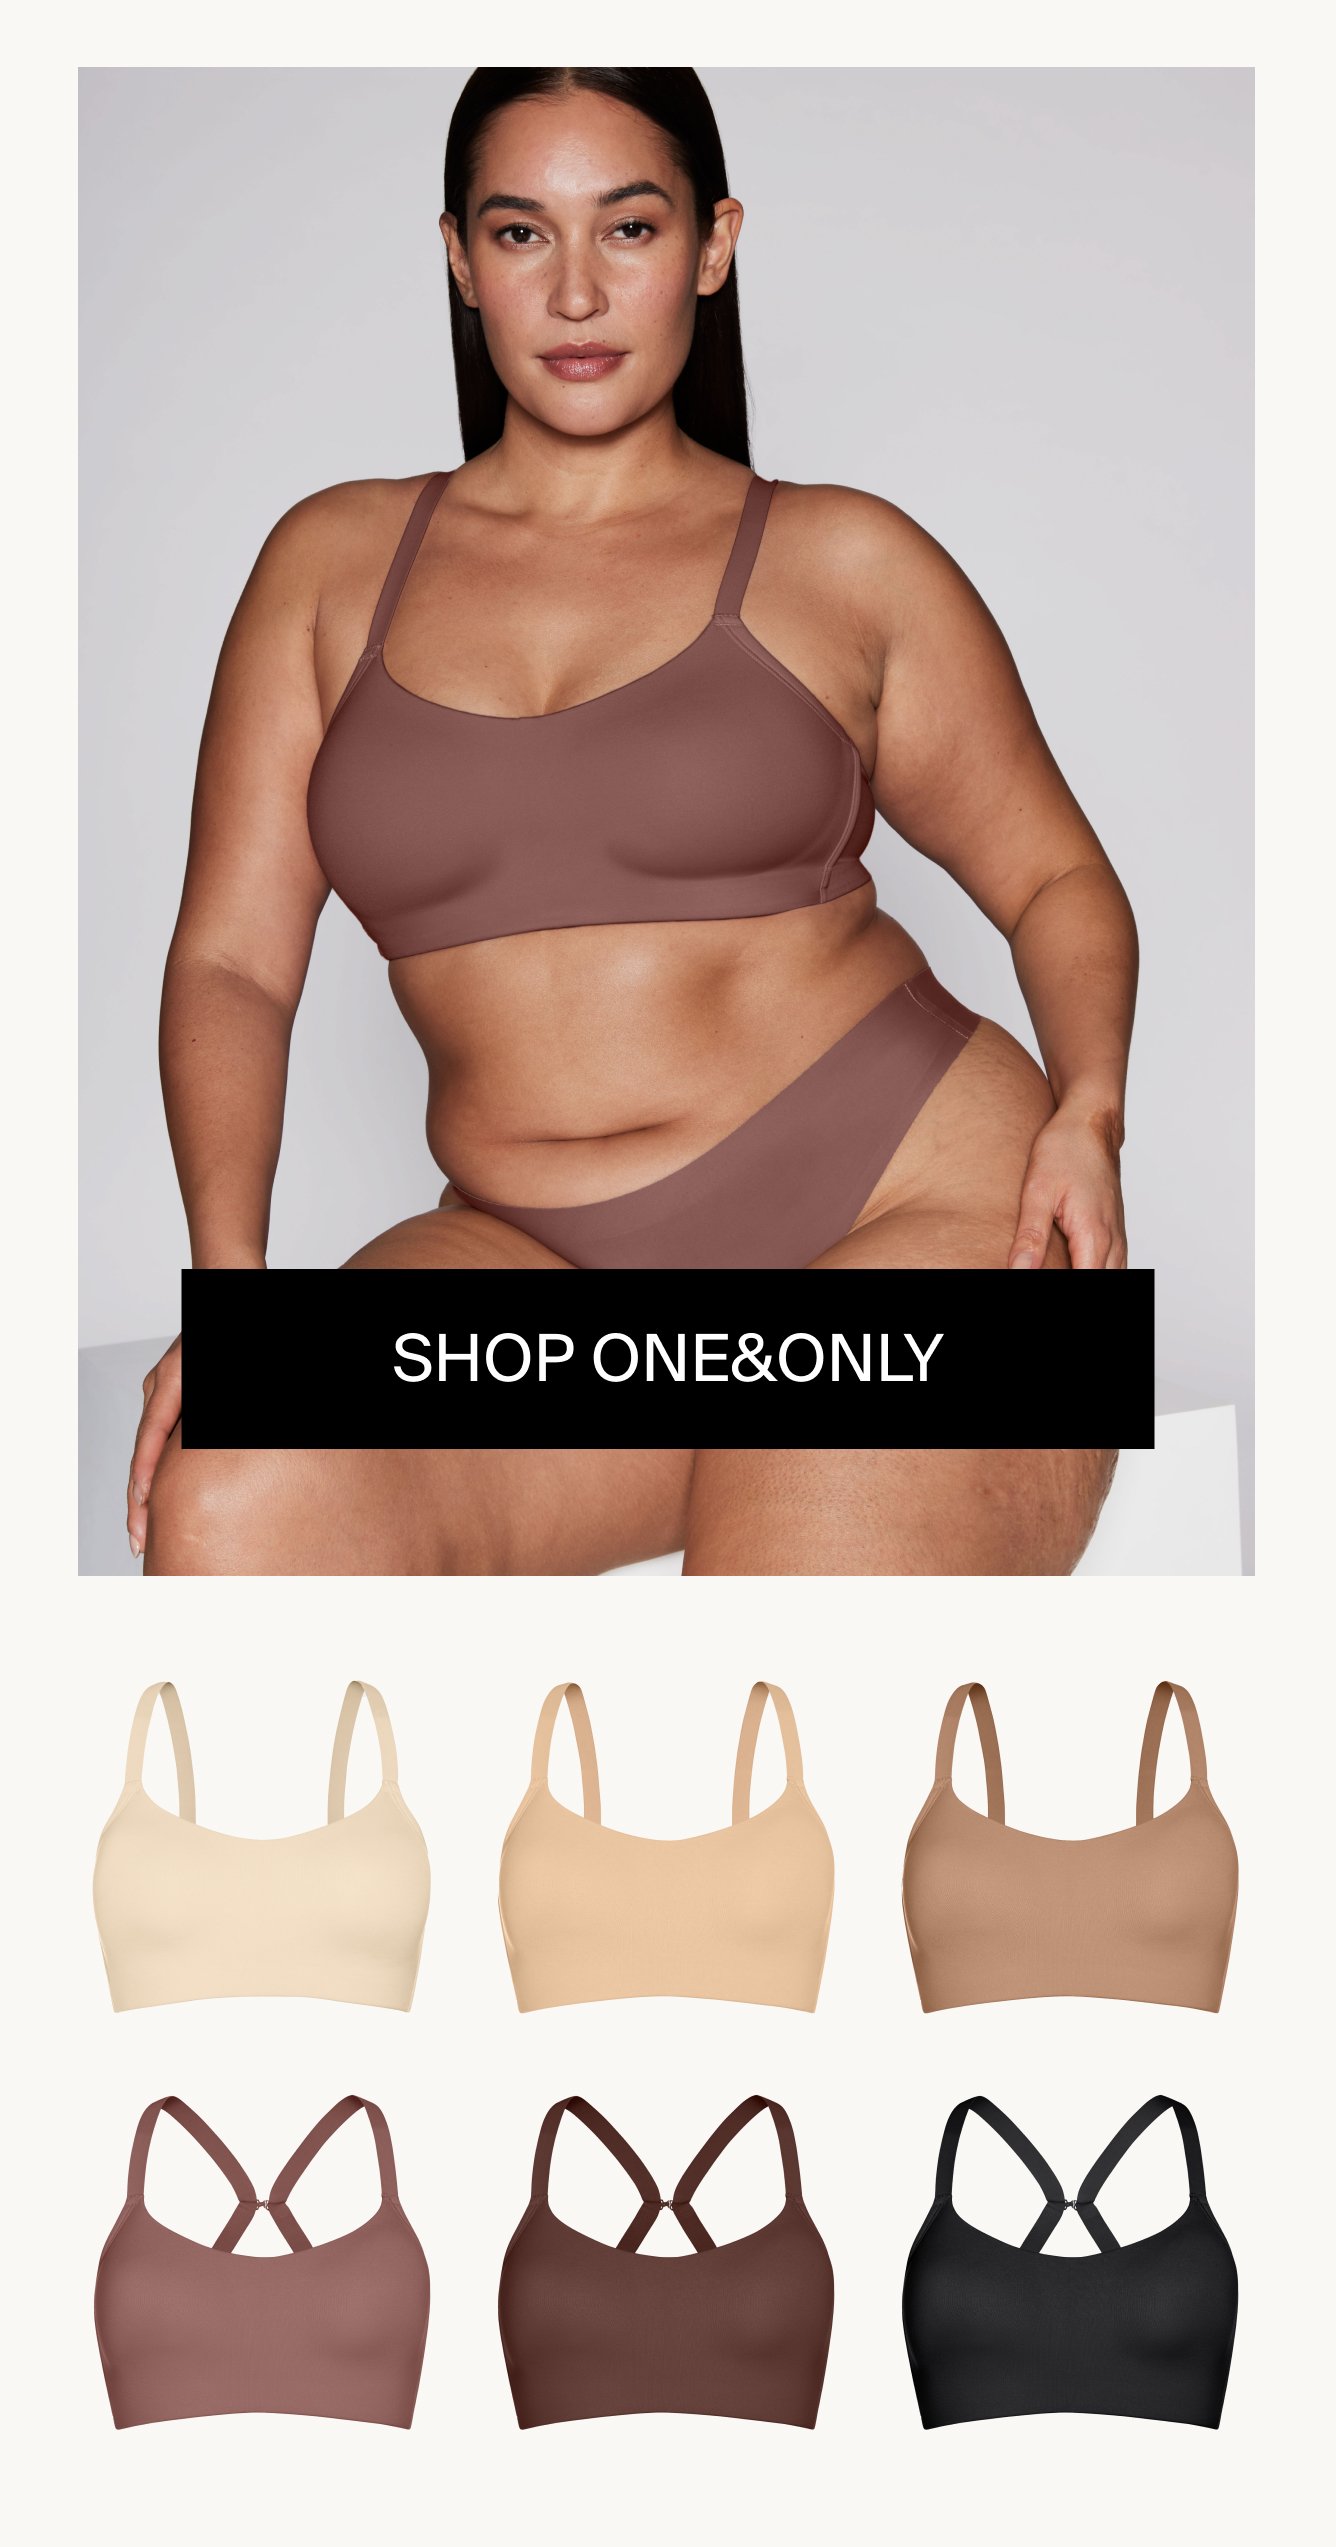 SHOP ONE&ONLY.